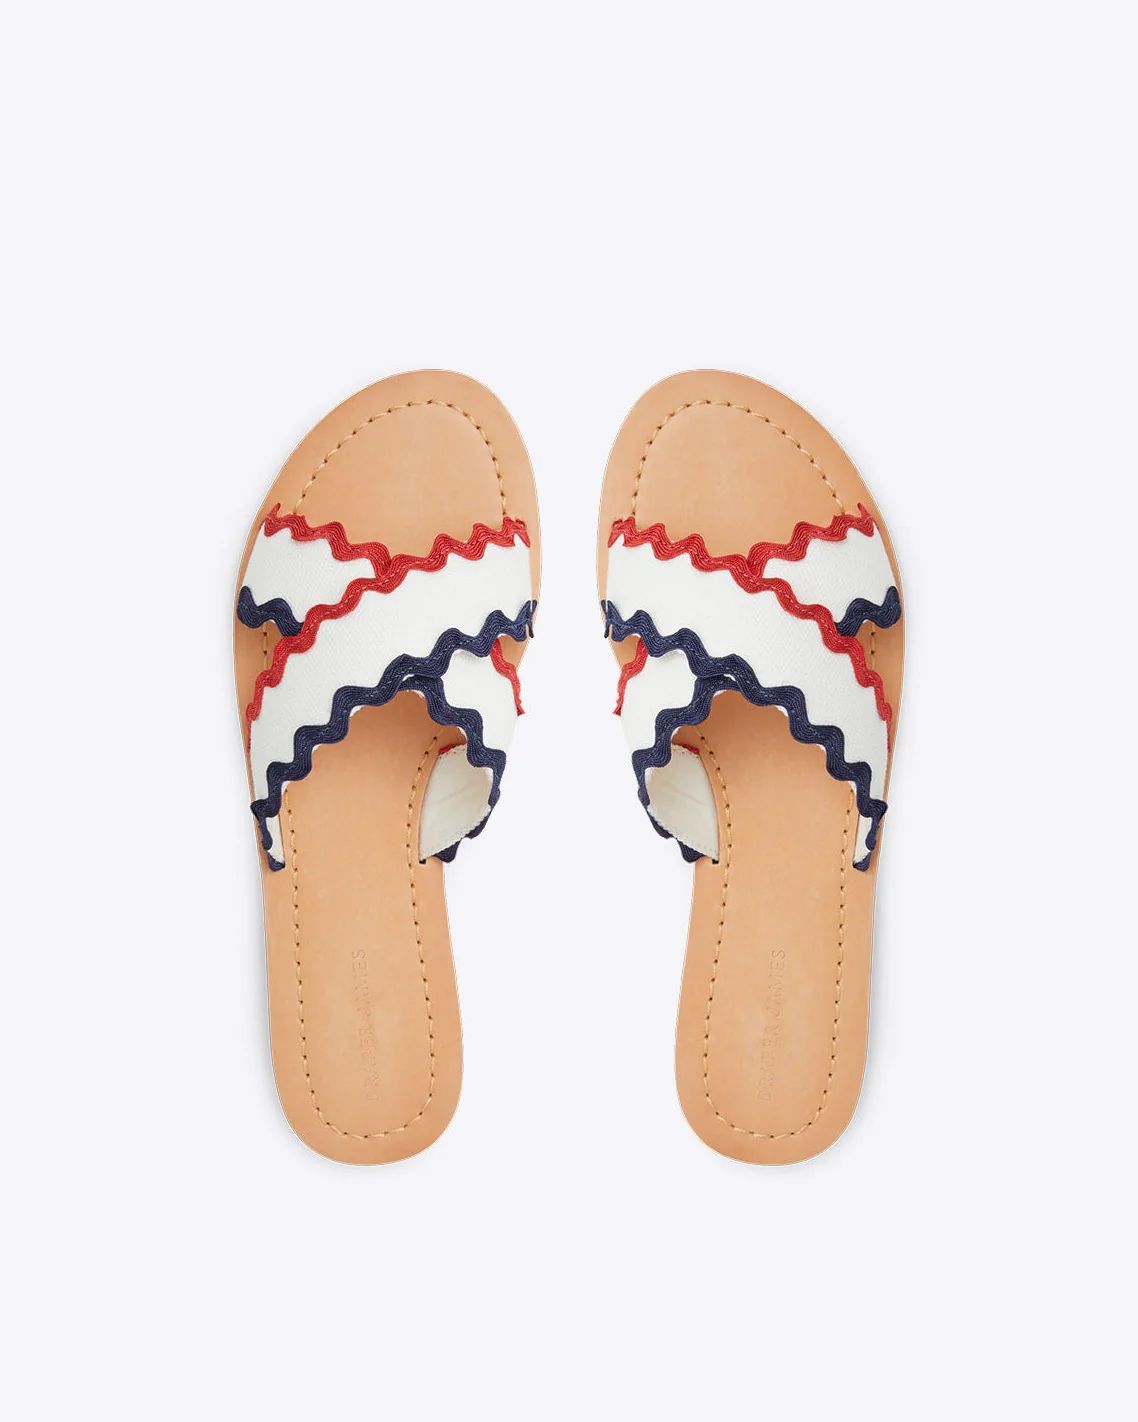 Piper Flat Sandals in Red, White, and Blue | Draper James (US)